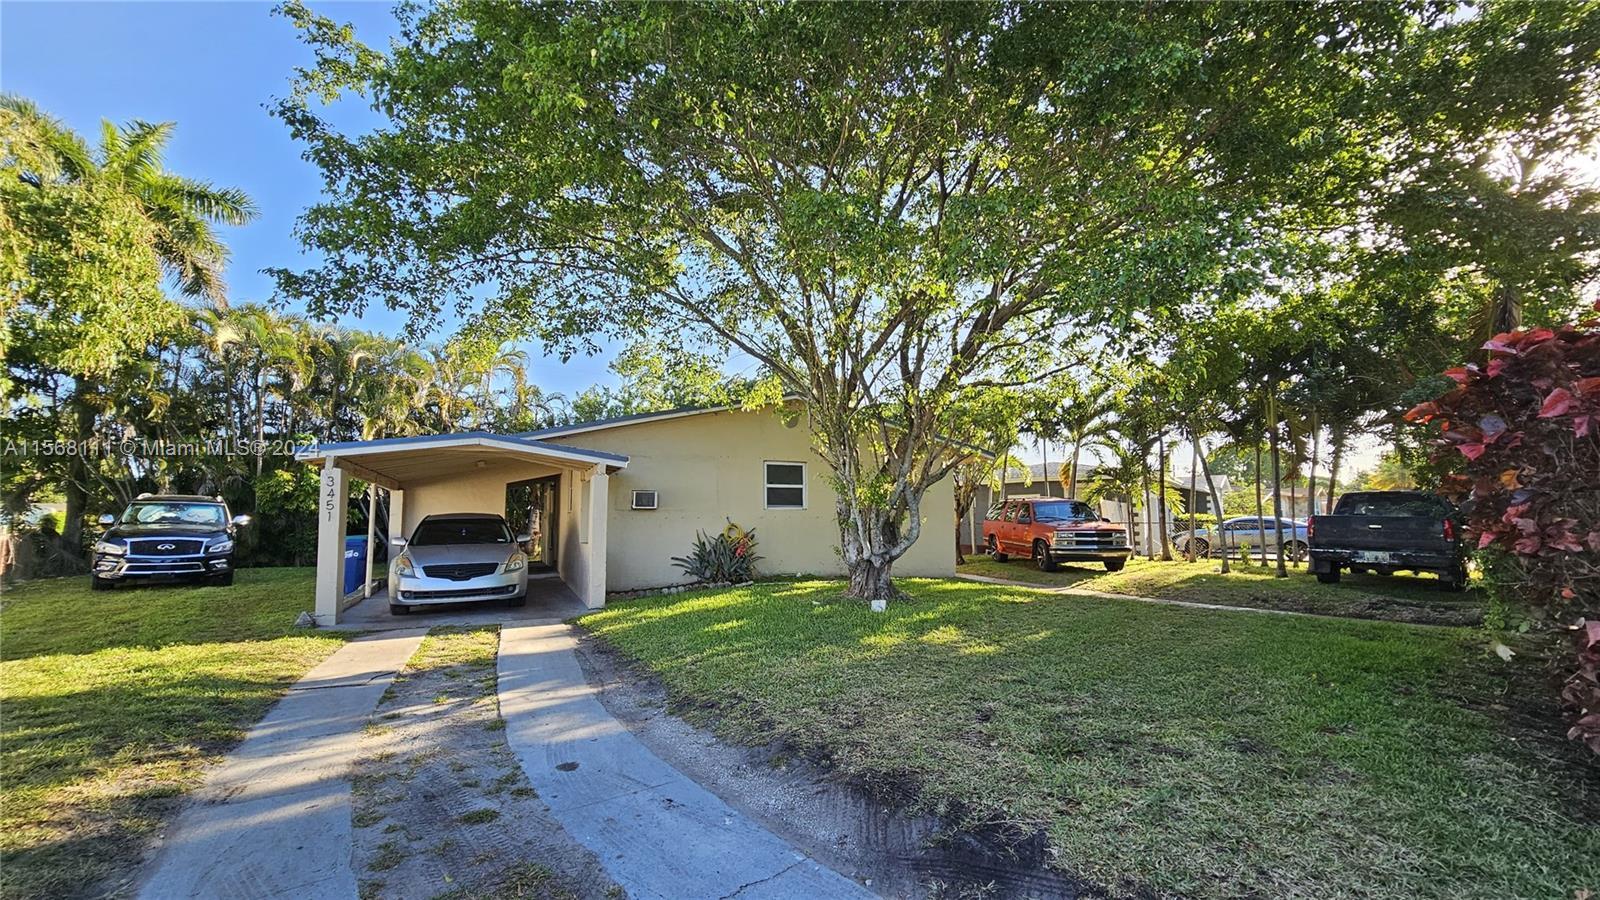 Photo of 3451 NW 2nd St in Lauderhill, FL